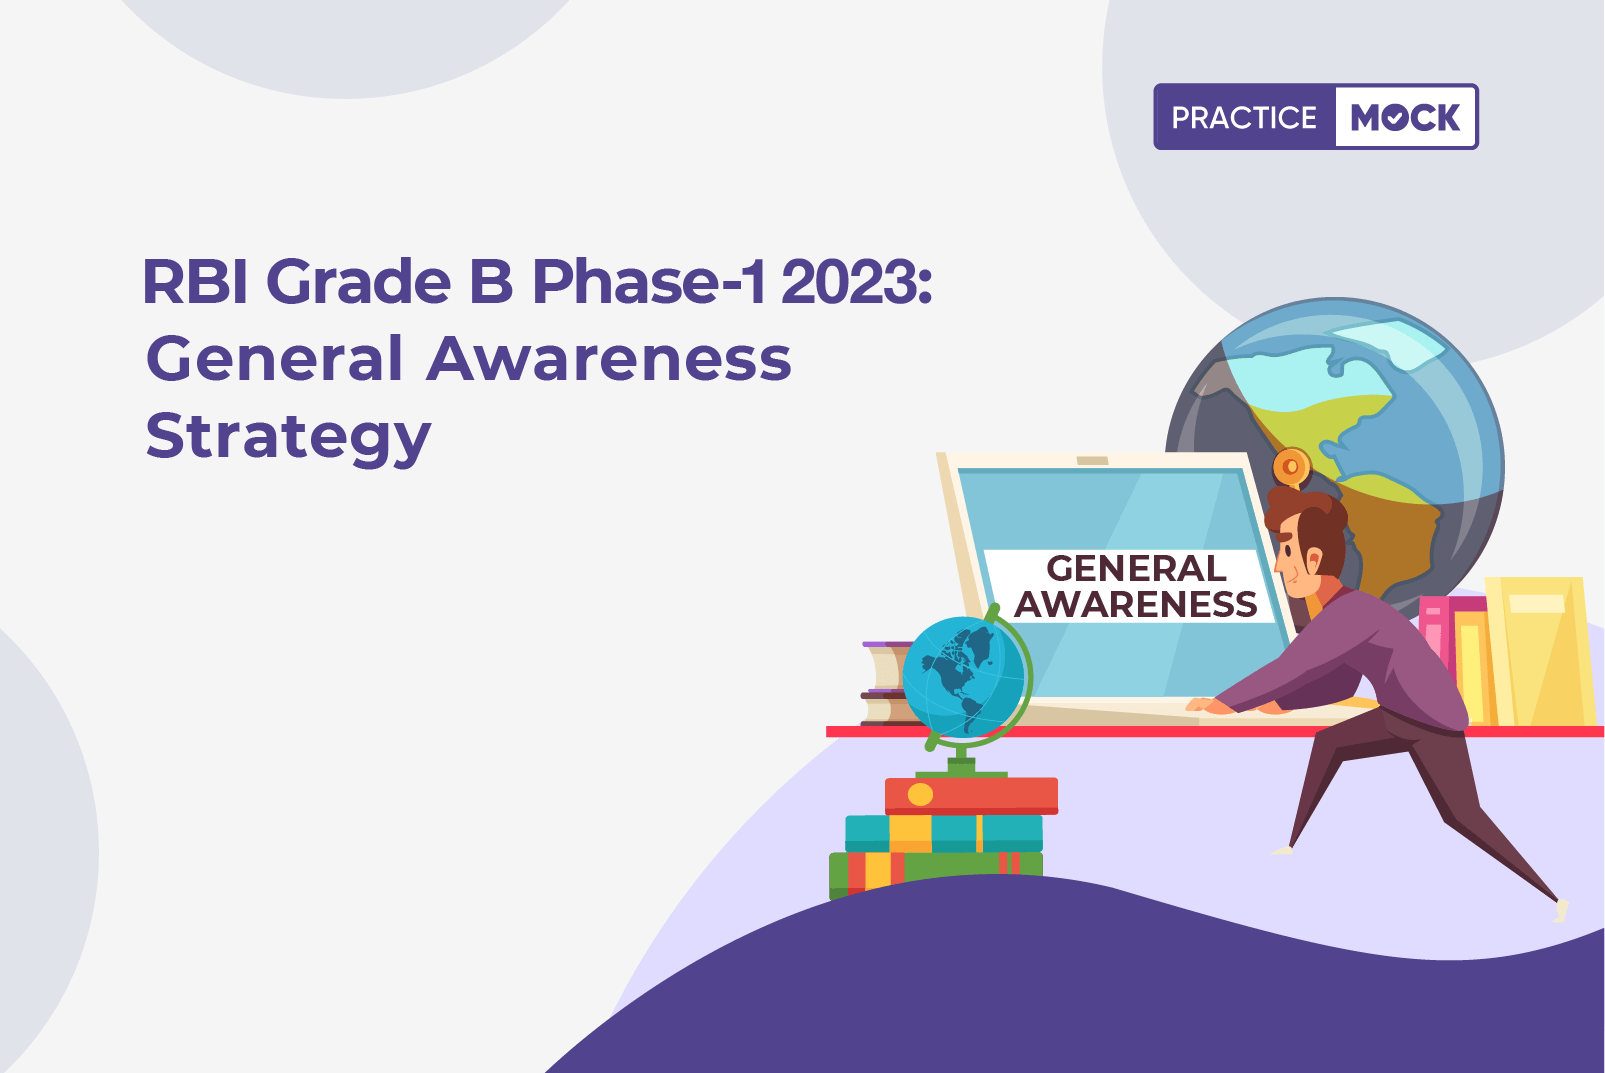 RBI Grade B Phase 1 2023-How to Score 70+ Marks in General Awareness?